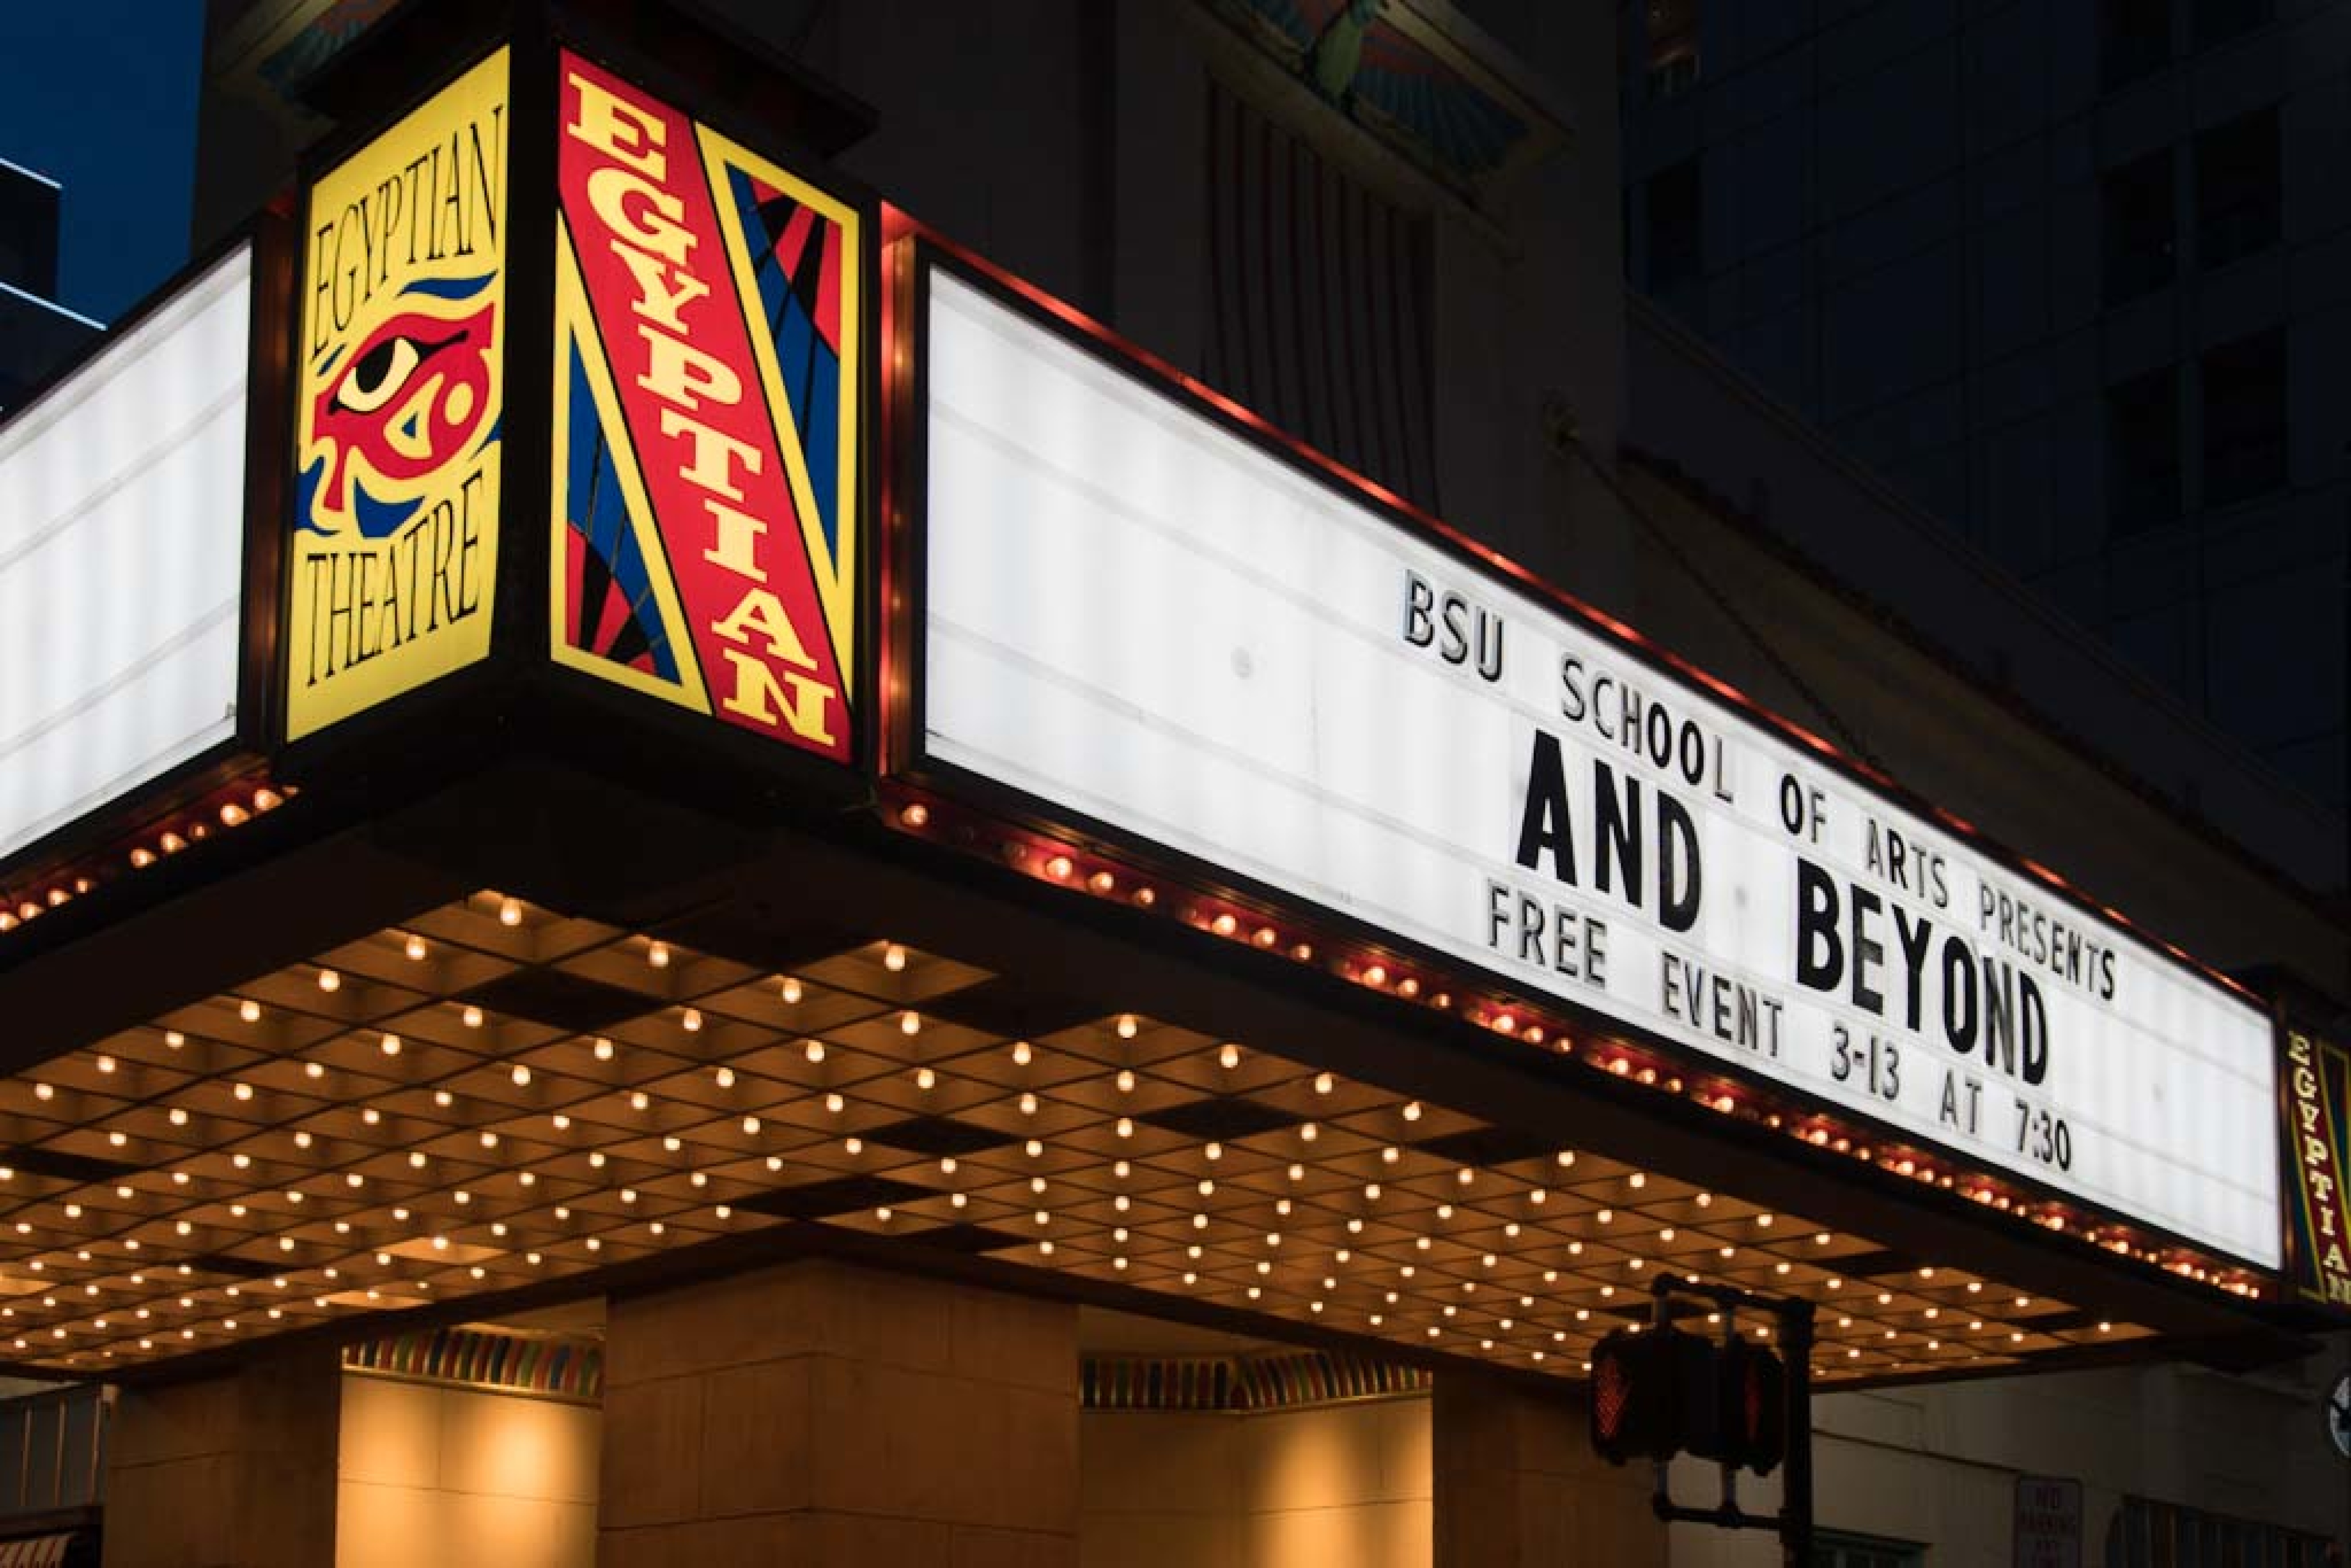 The Narrative Television Initiative, part of Boise State's Film and Television Arts program, screened its project And Beyond at The Egyptian Theatre in 2018.